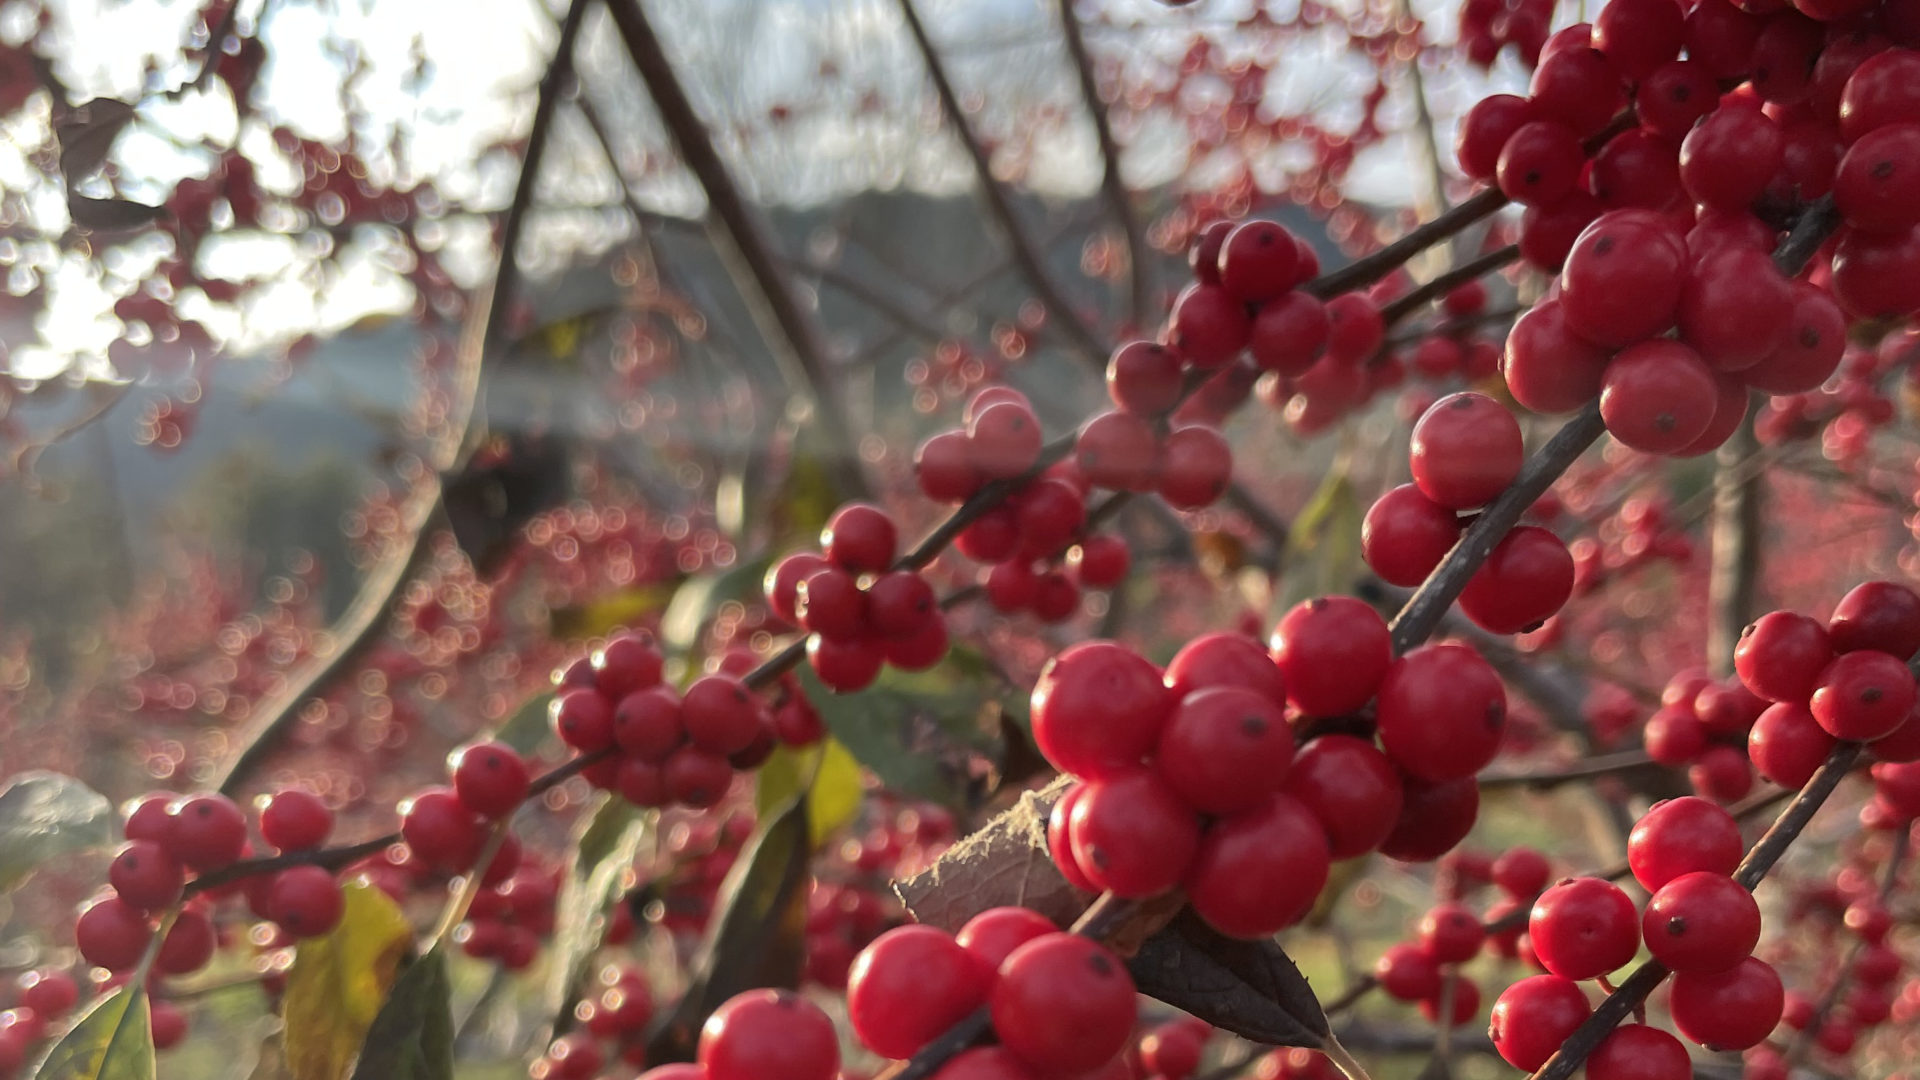 Winterberry glows in the sun at Windy Hill Orchard in Great Barrington.